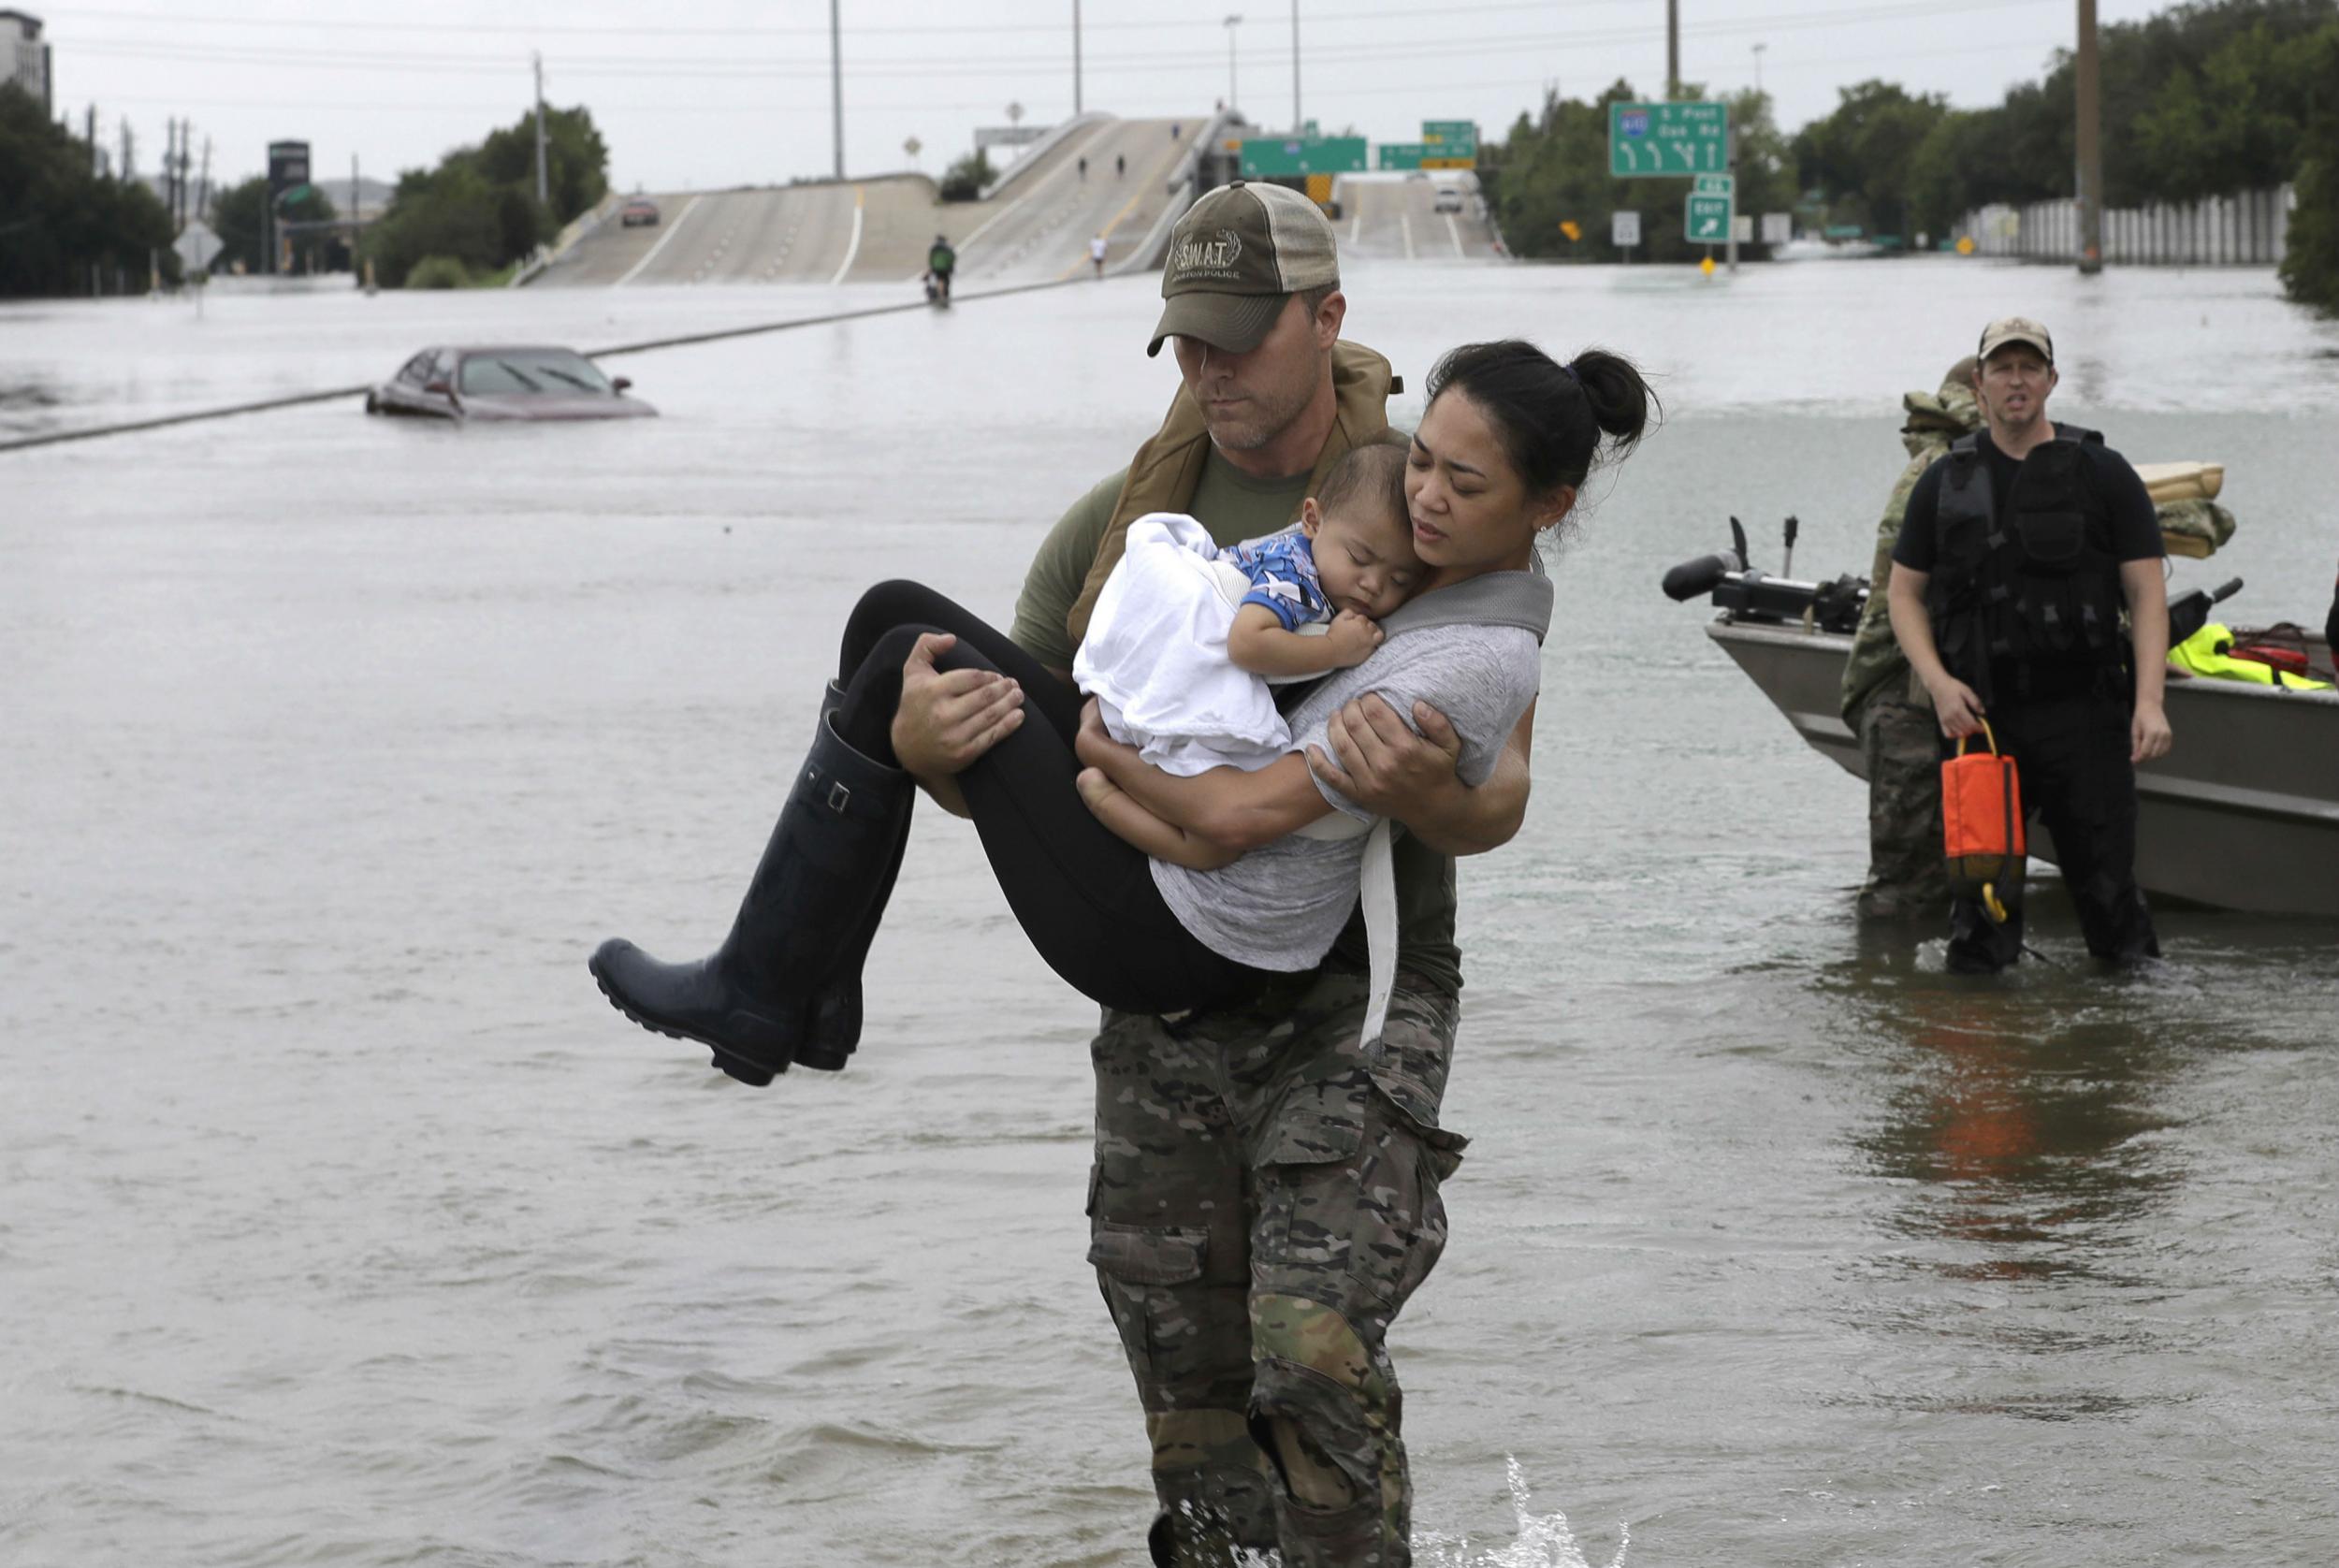 Police rescued at least 1,000 people, while others saved themselves